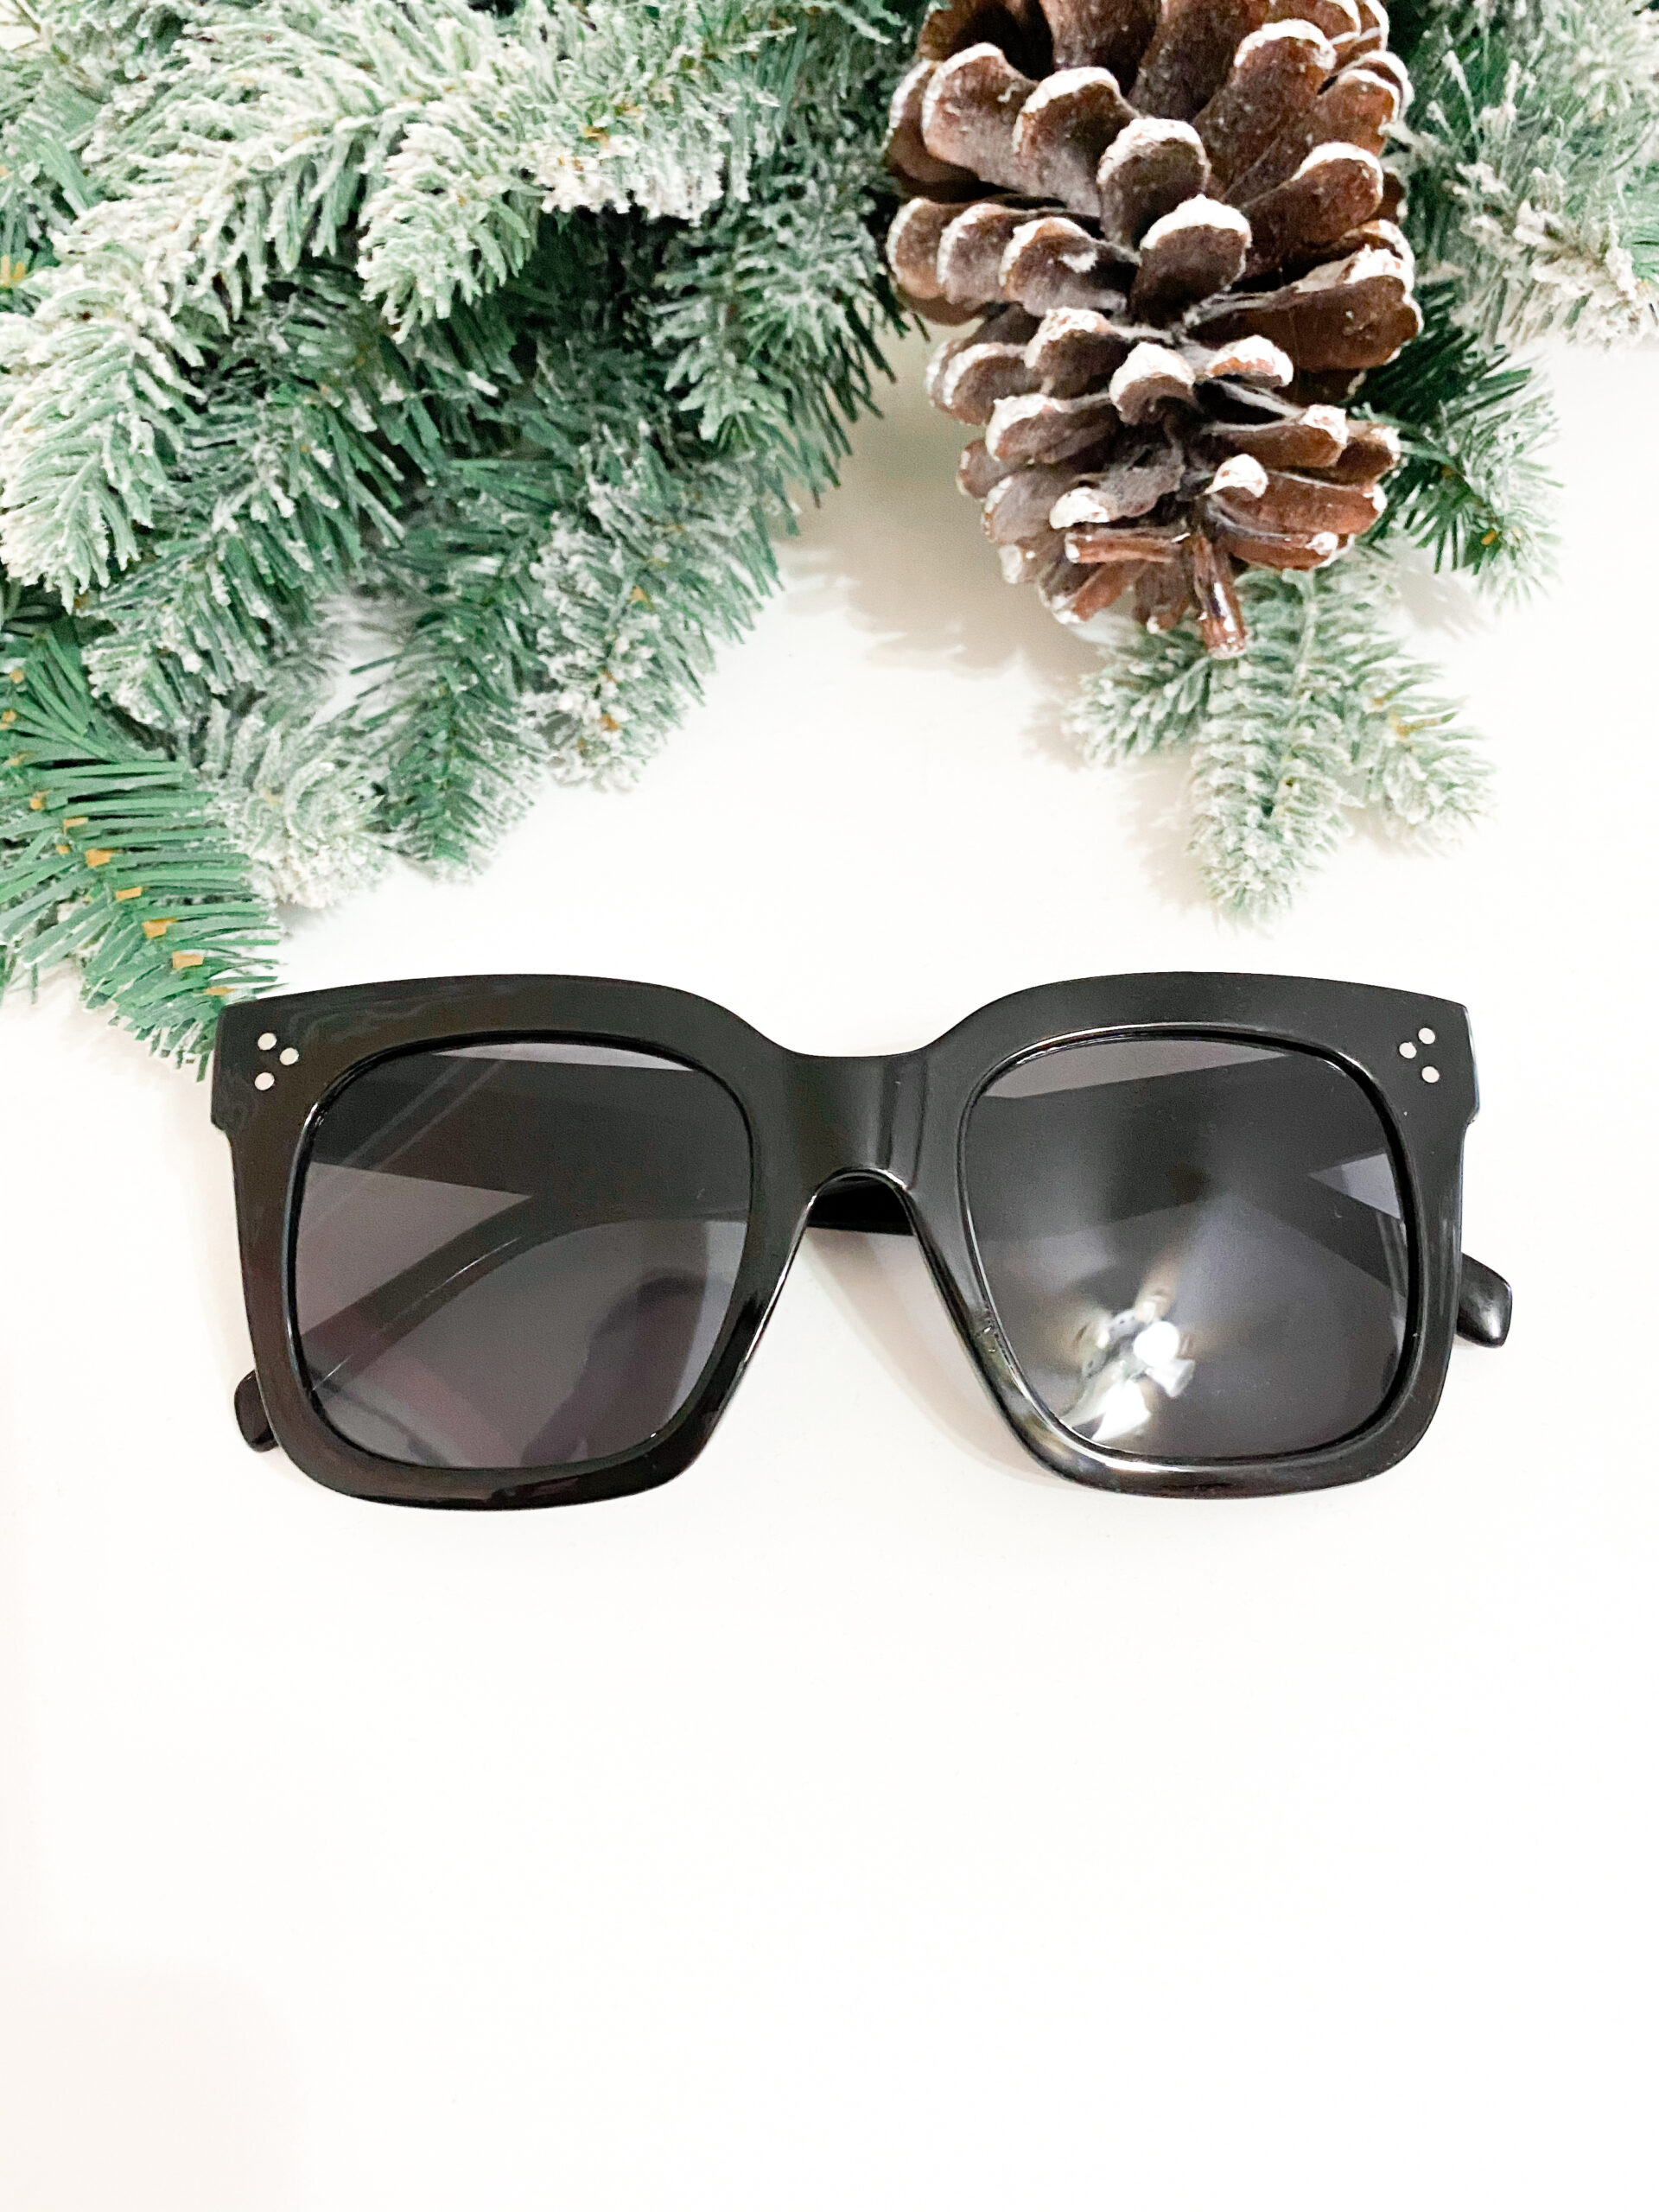 $15 Amazon Gucci Inspired Sunglasses | Daily Details